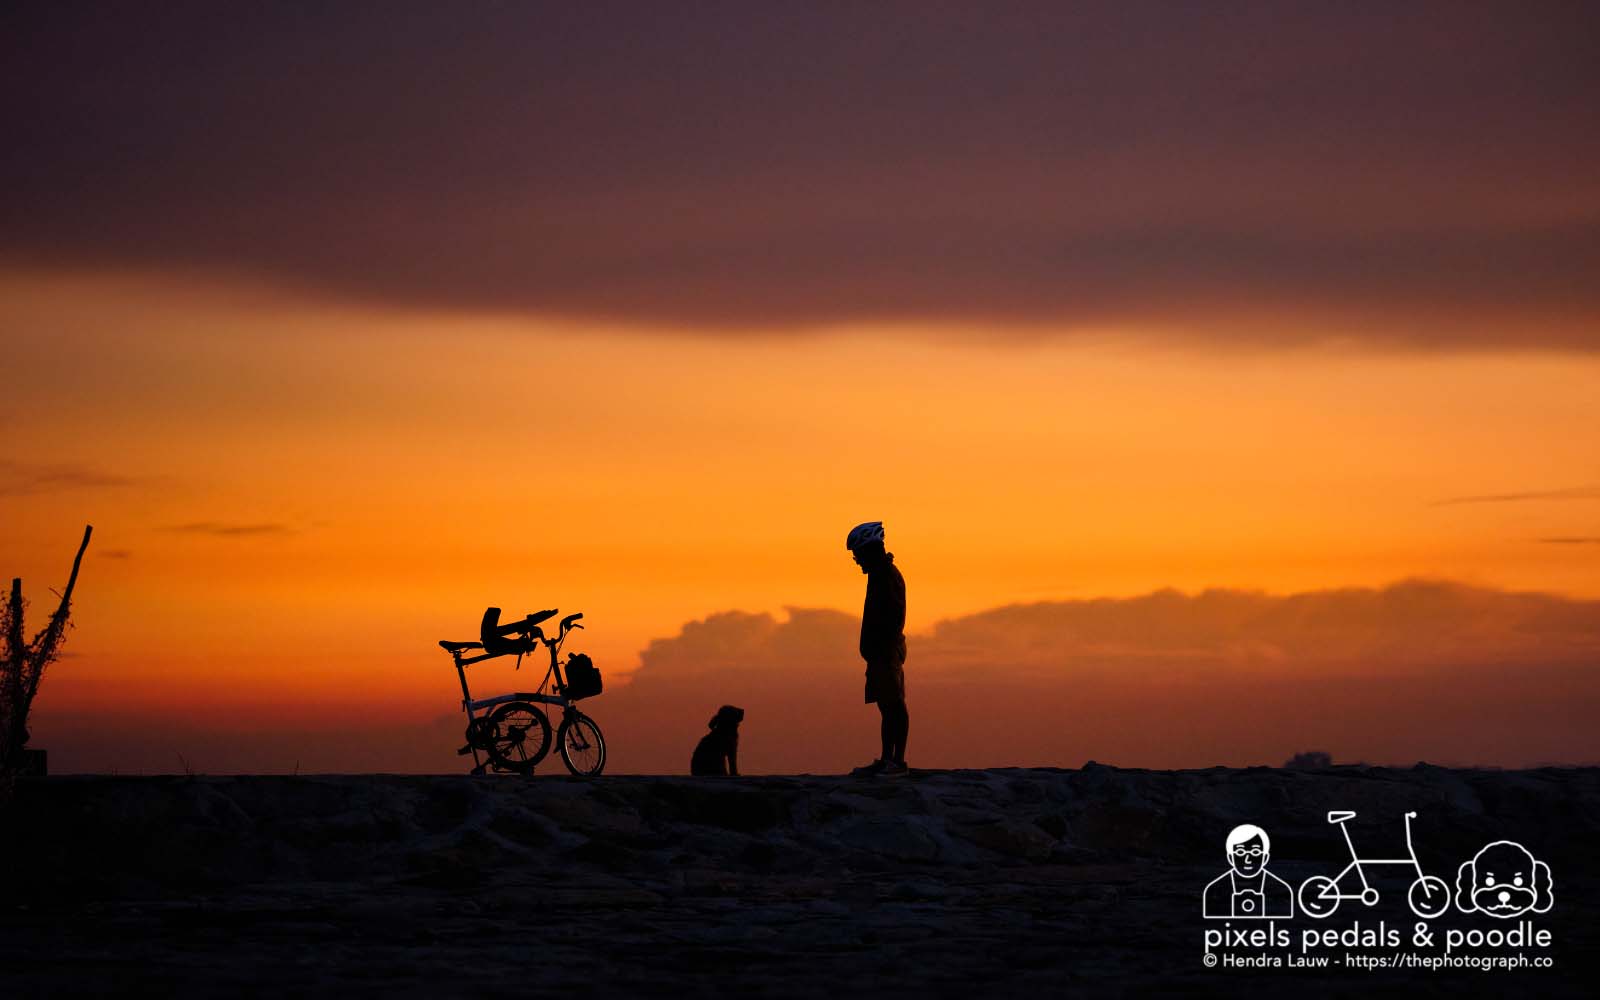 Poodle bike and a photographer during sunset at Marina East Breakwater